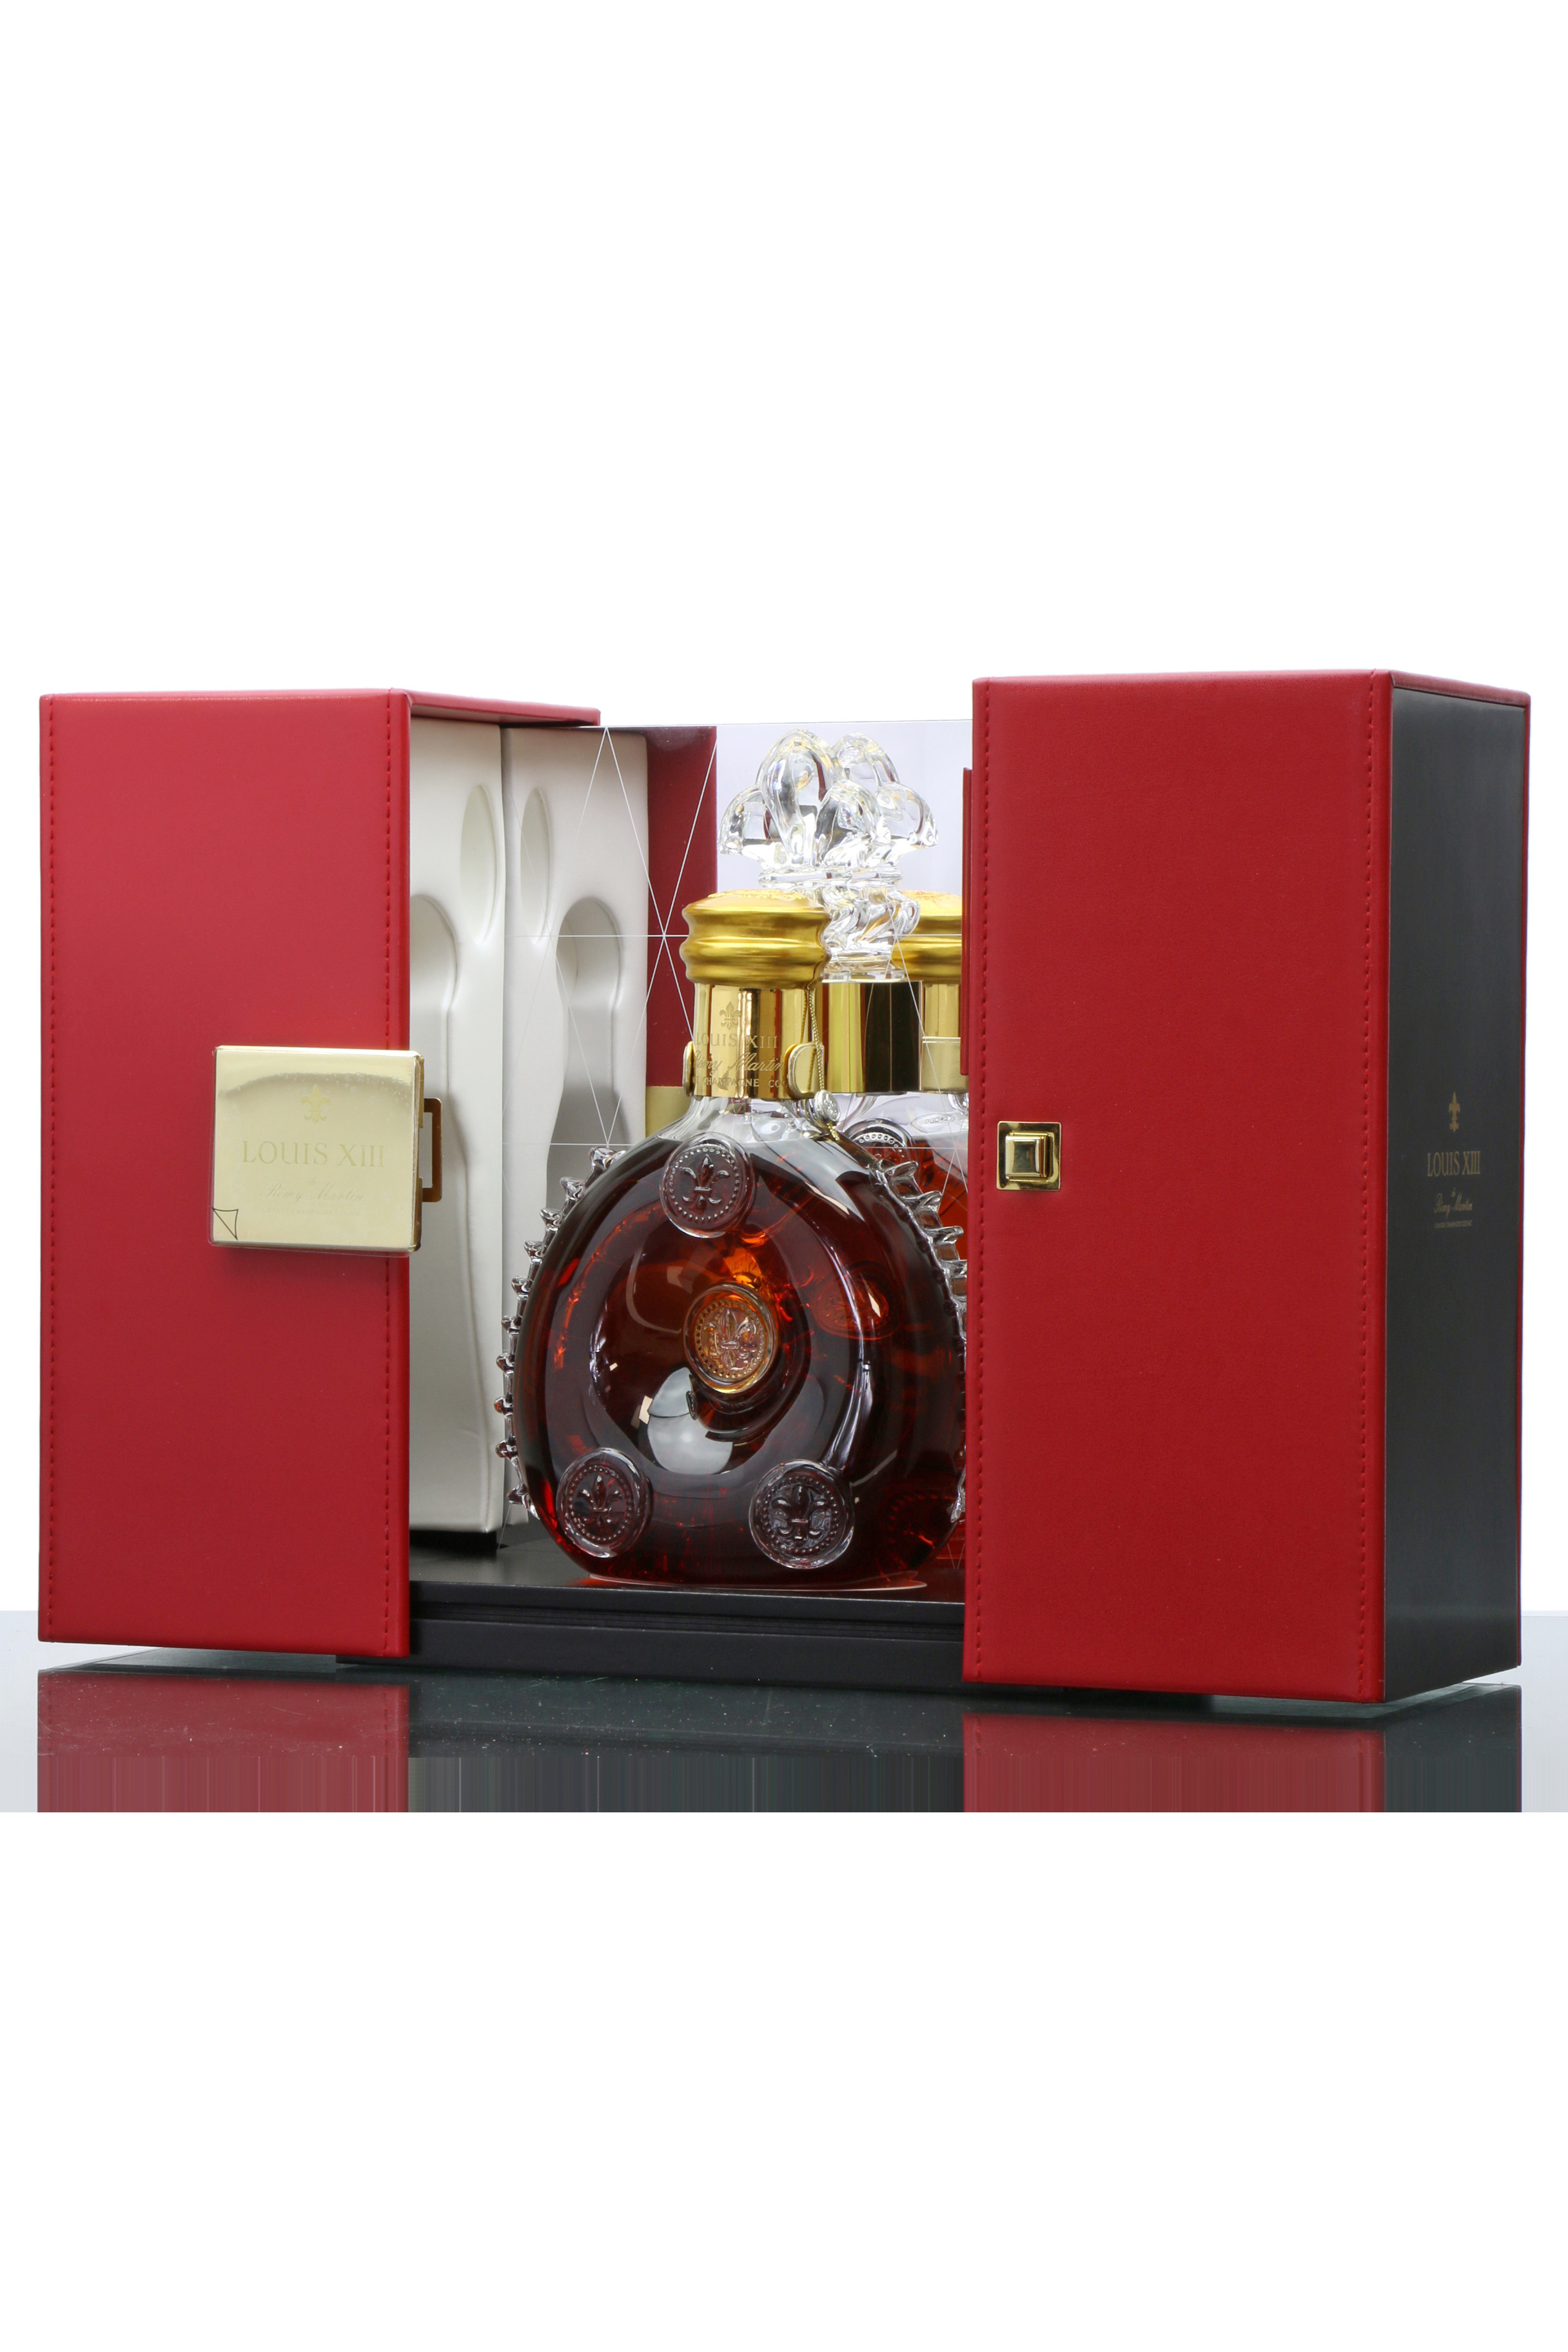 Remy Martin Louis XIII Cognac - Baccarat Crystal - Just Whisky